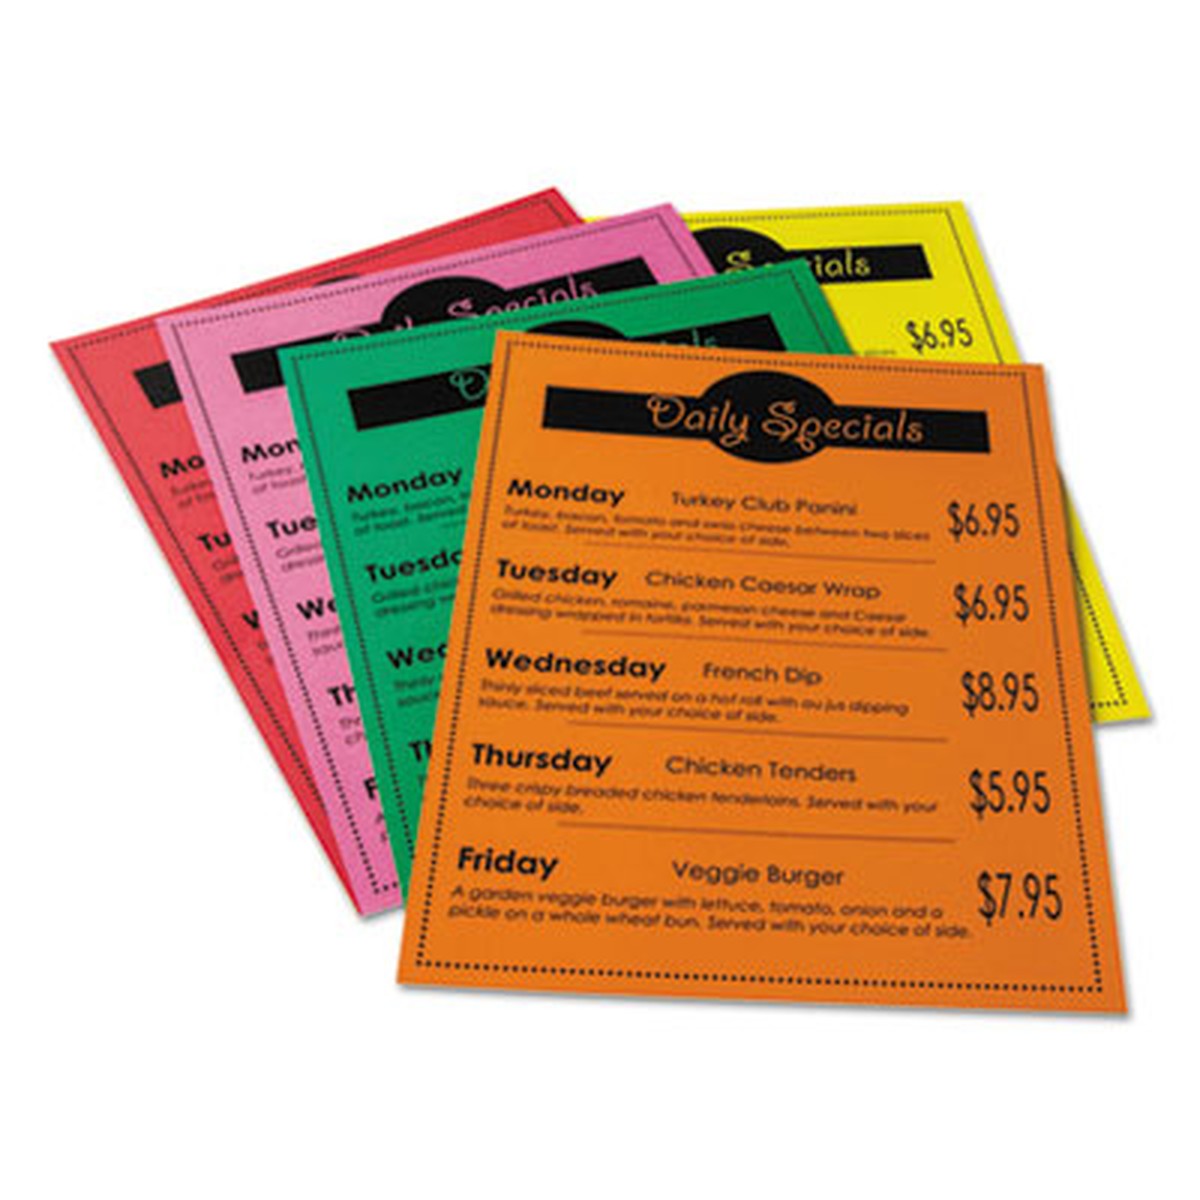 Premium Tagboard, 5 Assorted Bright Colors, 8-1/2" x 11", 50 Sheets